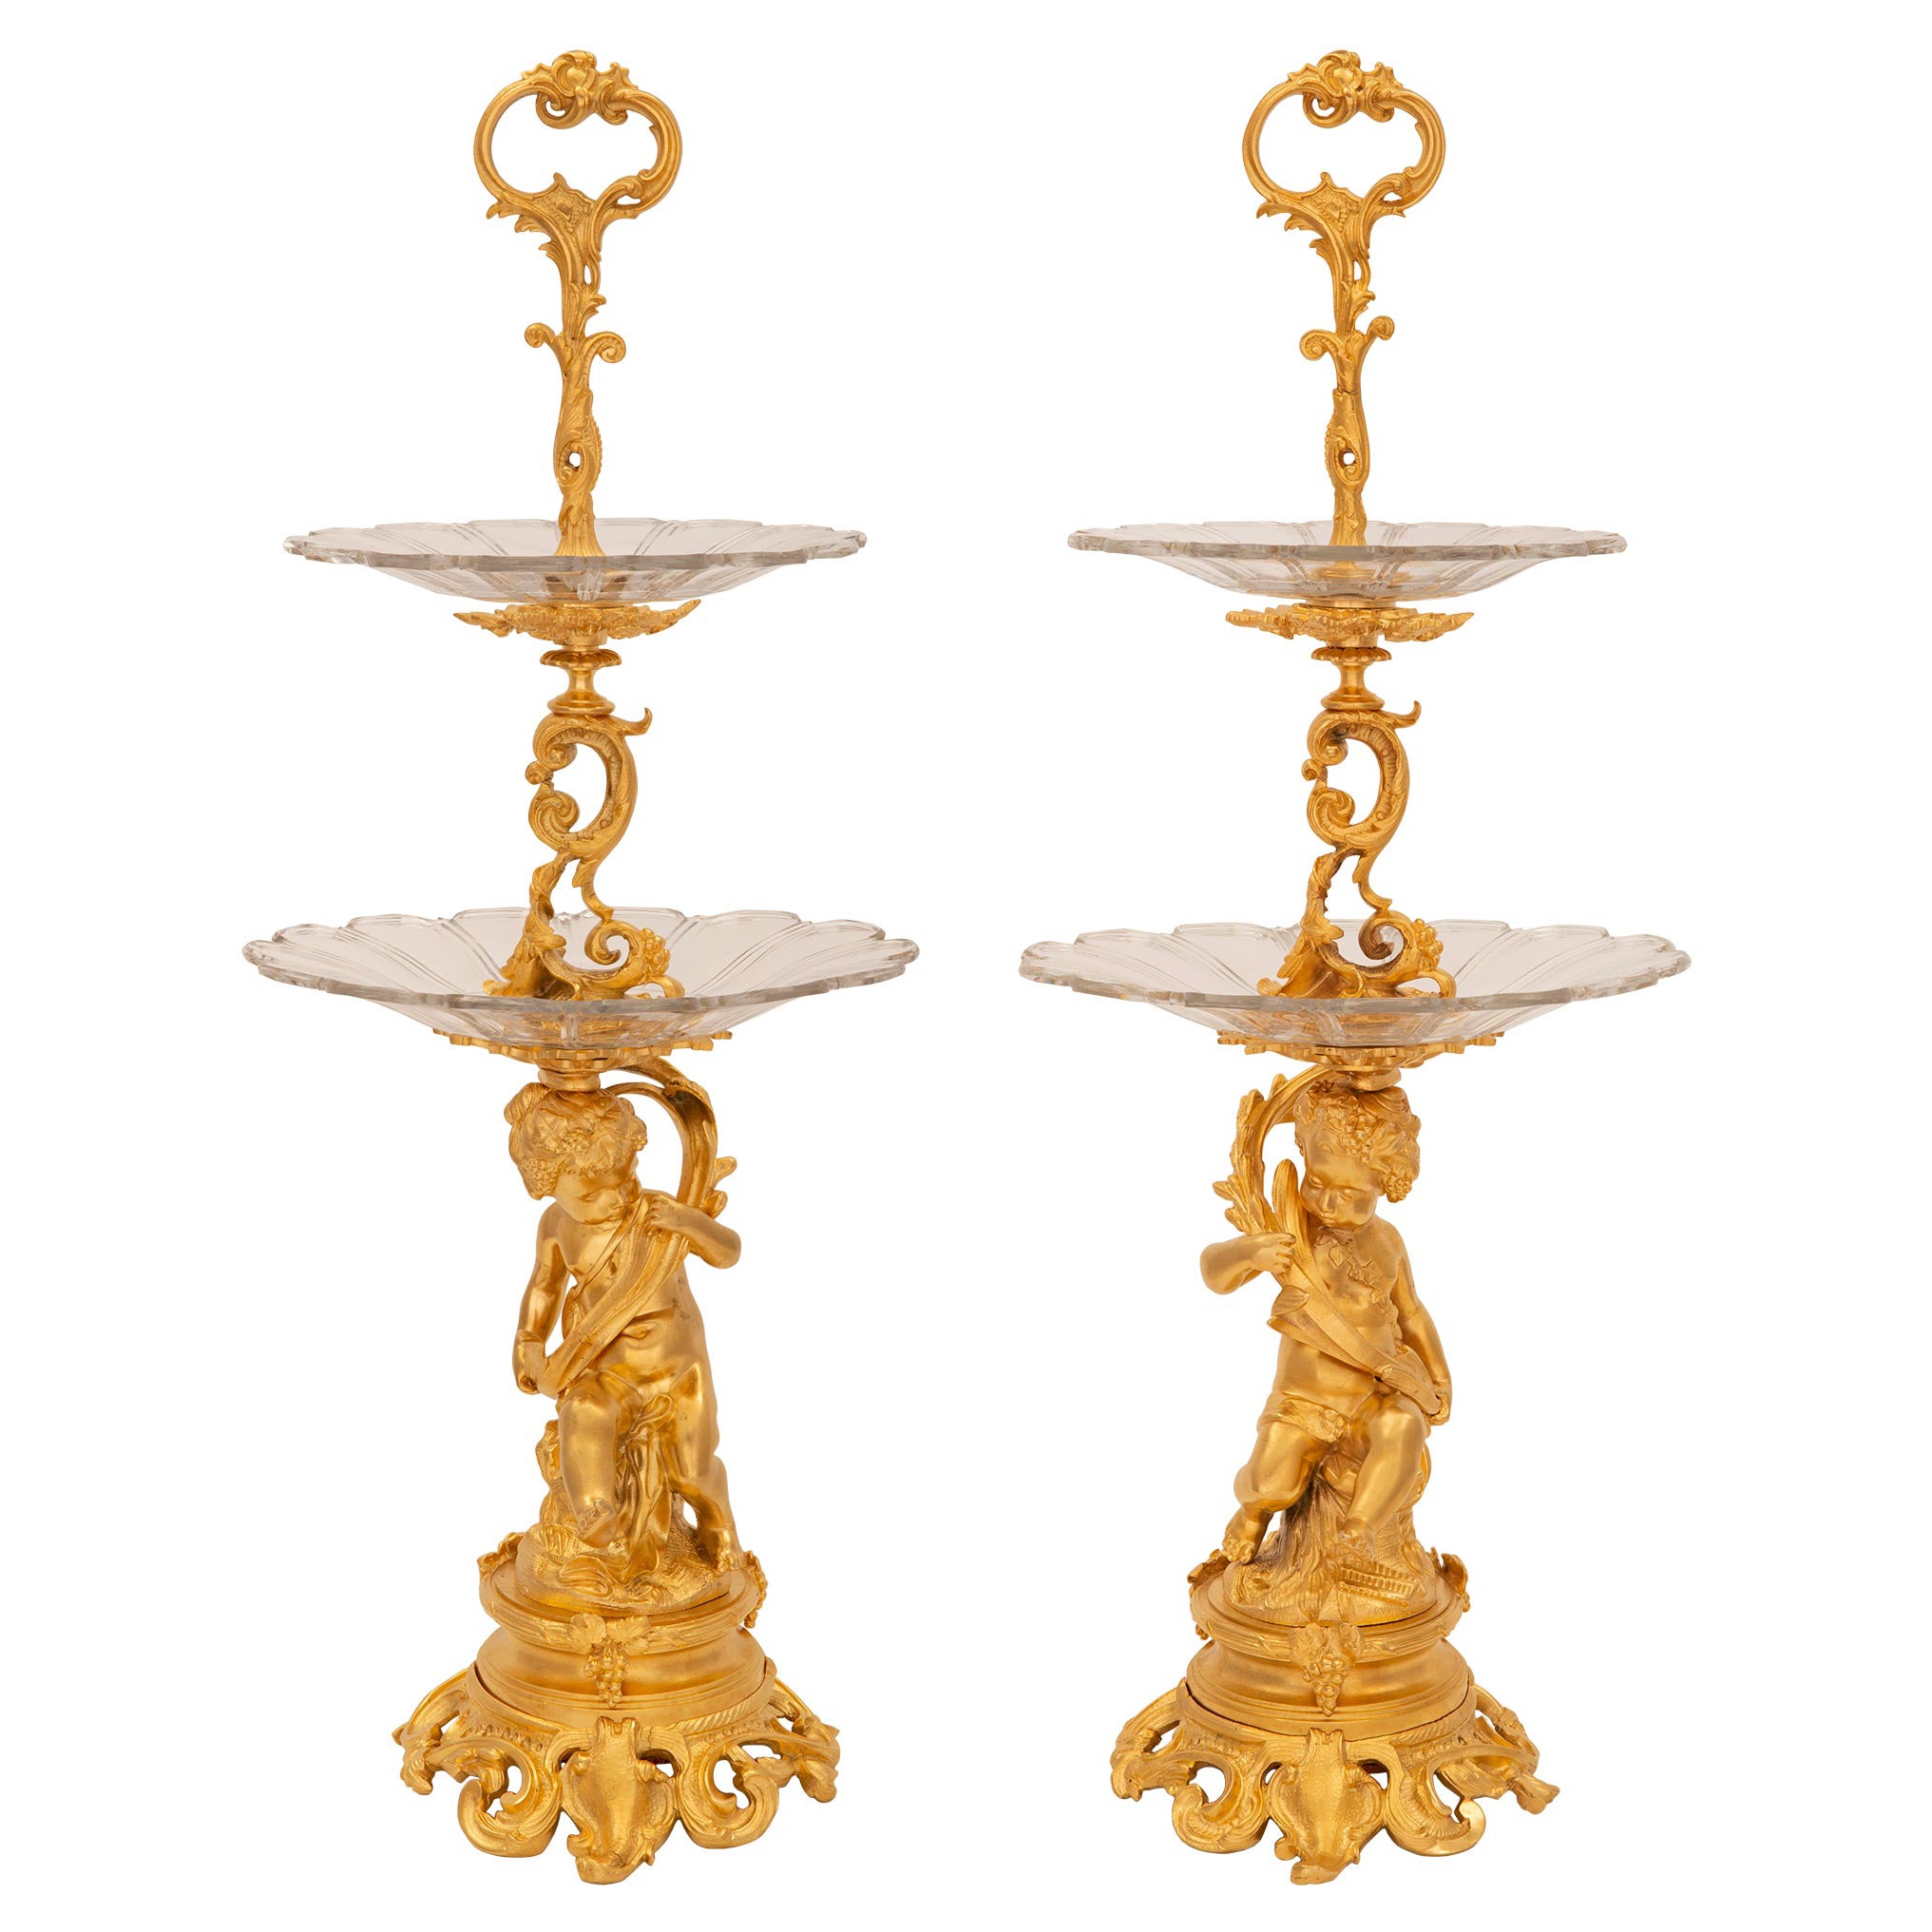 Pair of French 19th Century Belle Époque Period Baccarat Crystal Centerpieces